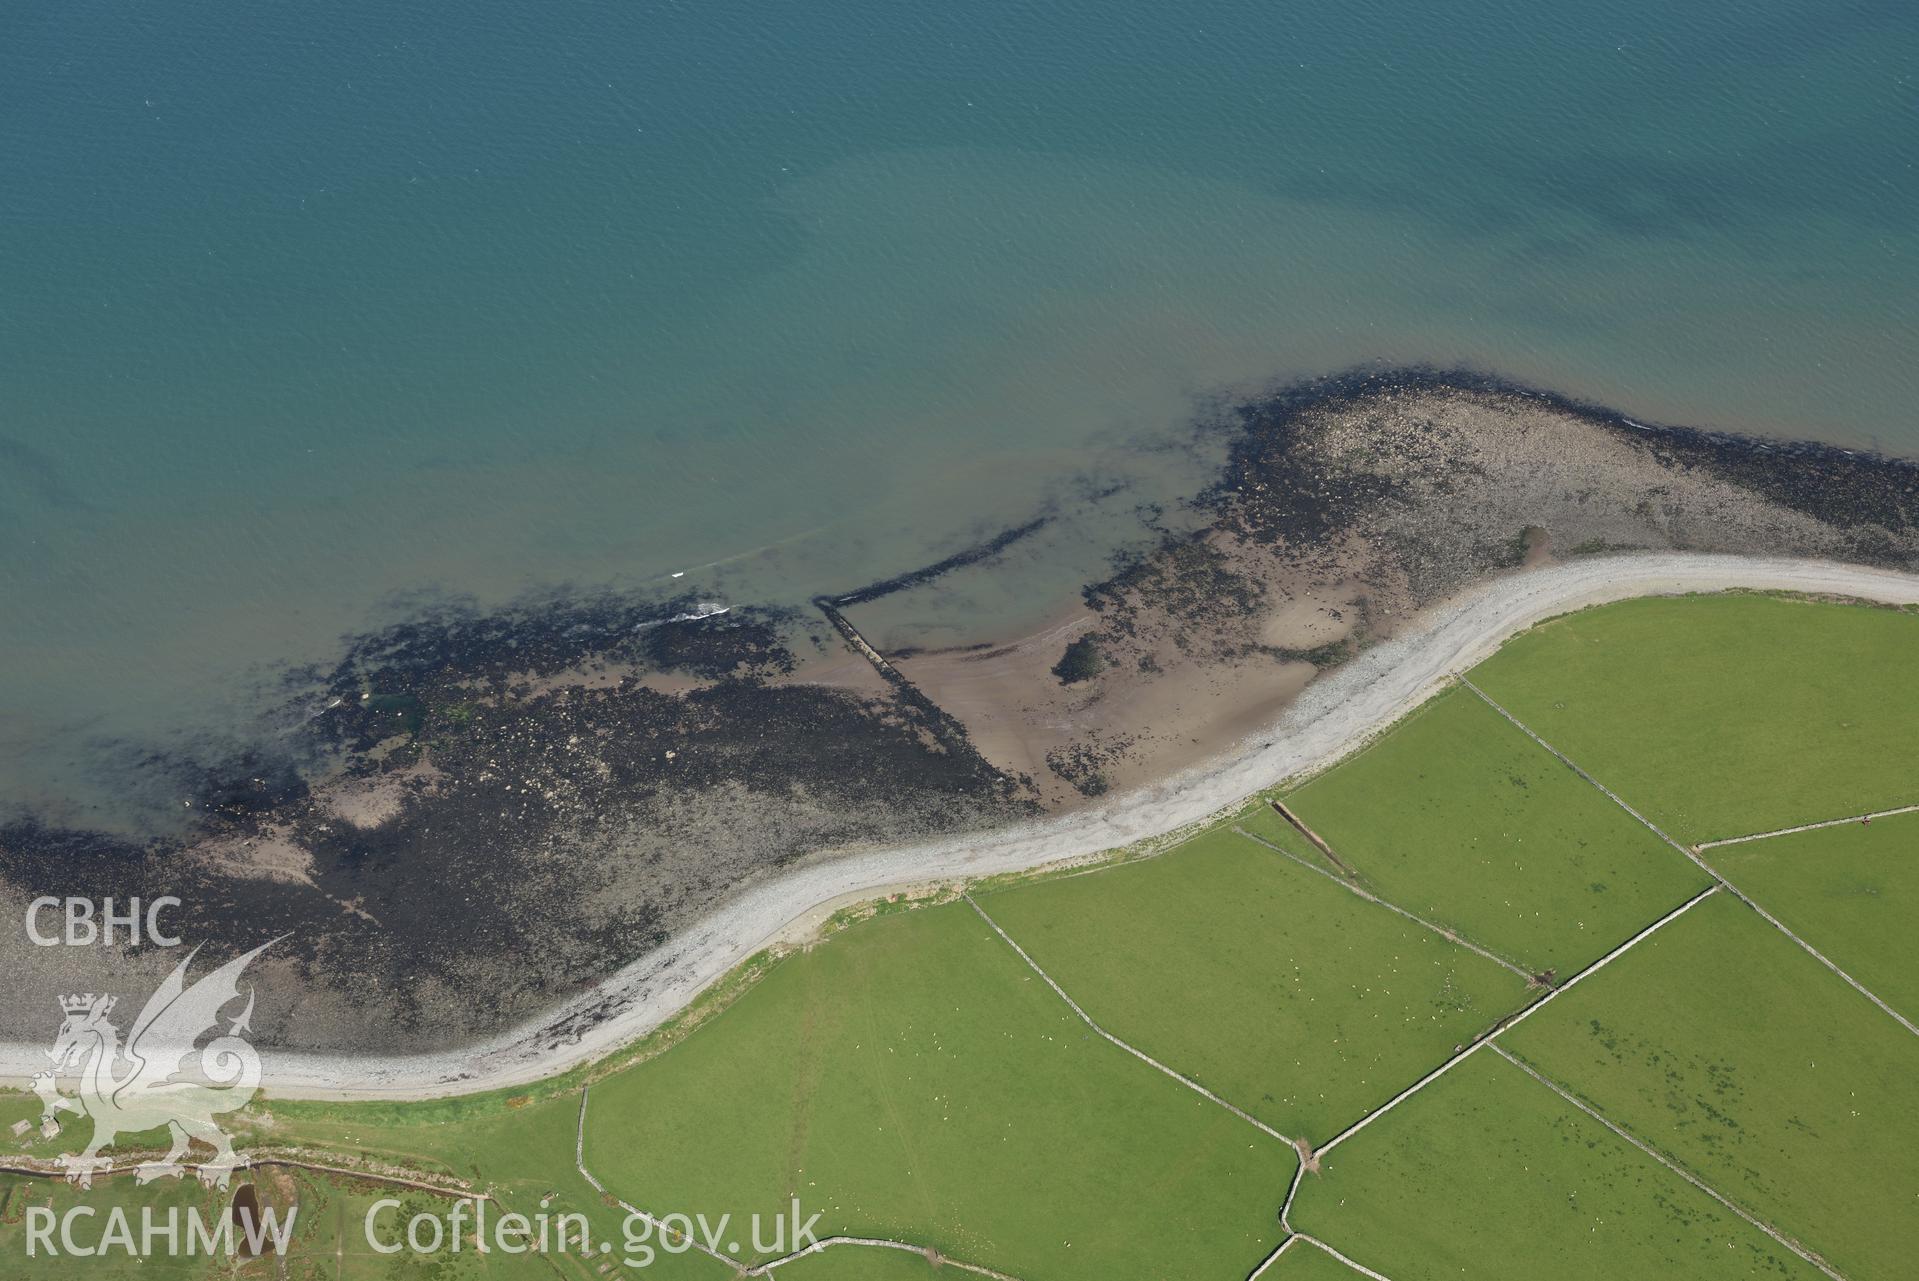 Aerial photography of Llwyngwril fish trap taken on 3rd May 2017.  Baseline aerial reconnaissance survey for the CHERISH Project. ? Crown: CHERISH PROJECT 2017. Produced with EU funds through the Ireland Wales Co-operation Programme 2014-2020. All material made freely available through the Open Government Licence.